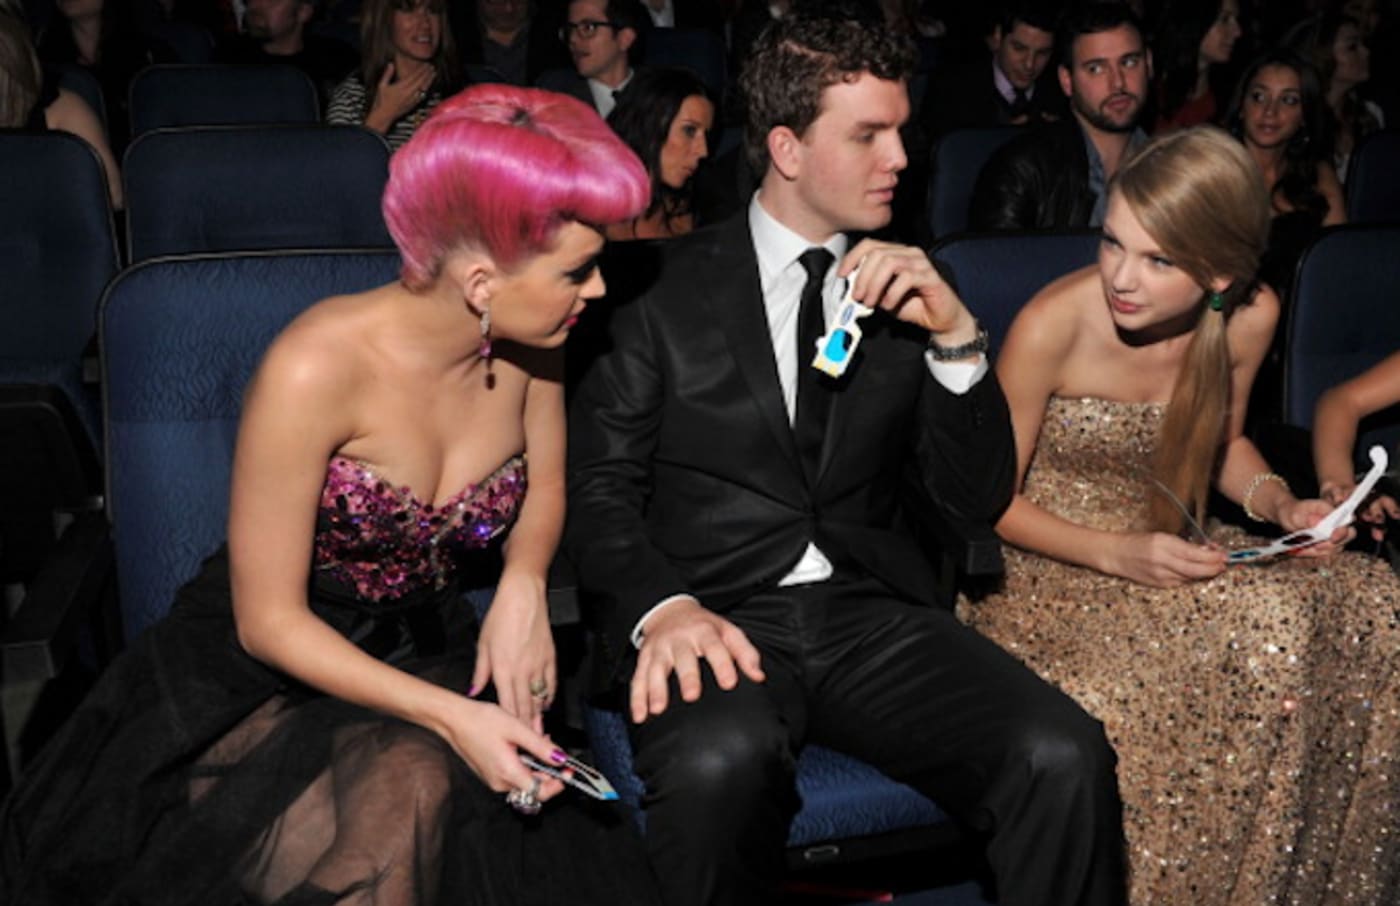 Singer Katy Perry, Austin Swift and singer Taylor Swift